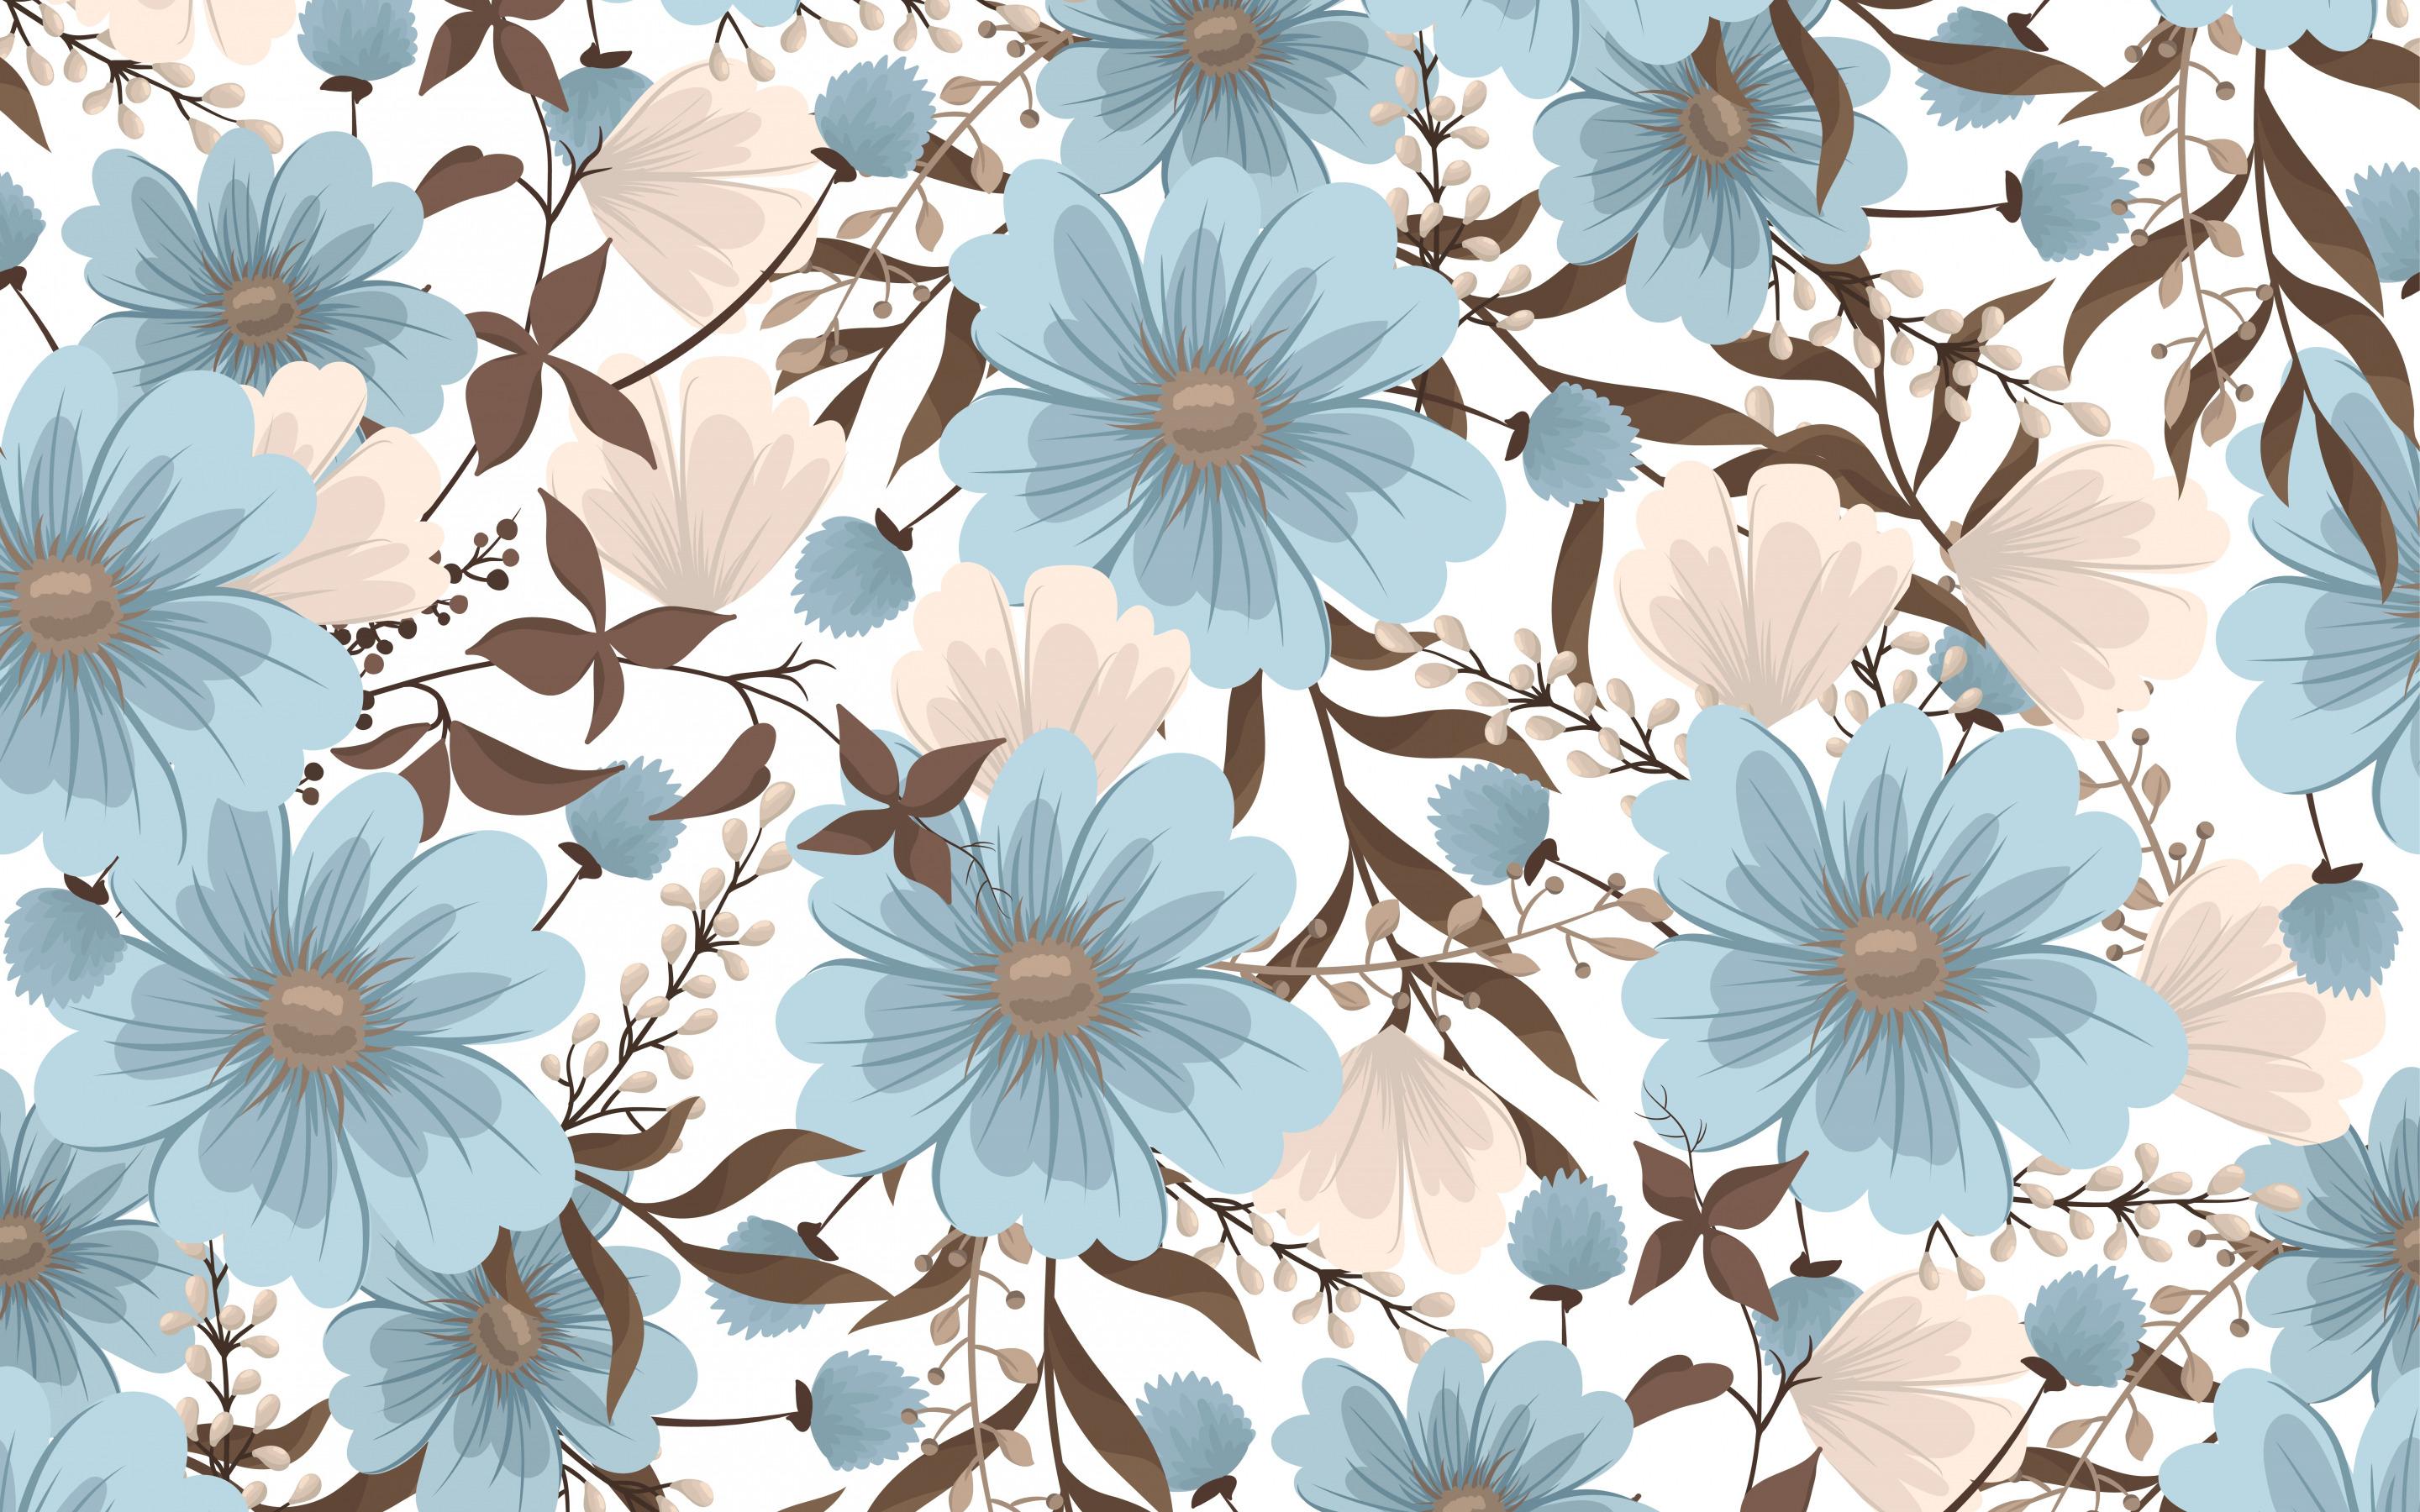 Flowers and Aesthetic Brown Background Graphic by povridestudio